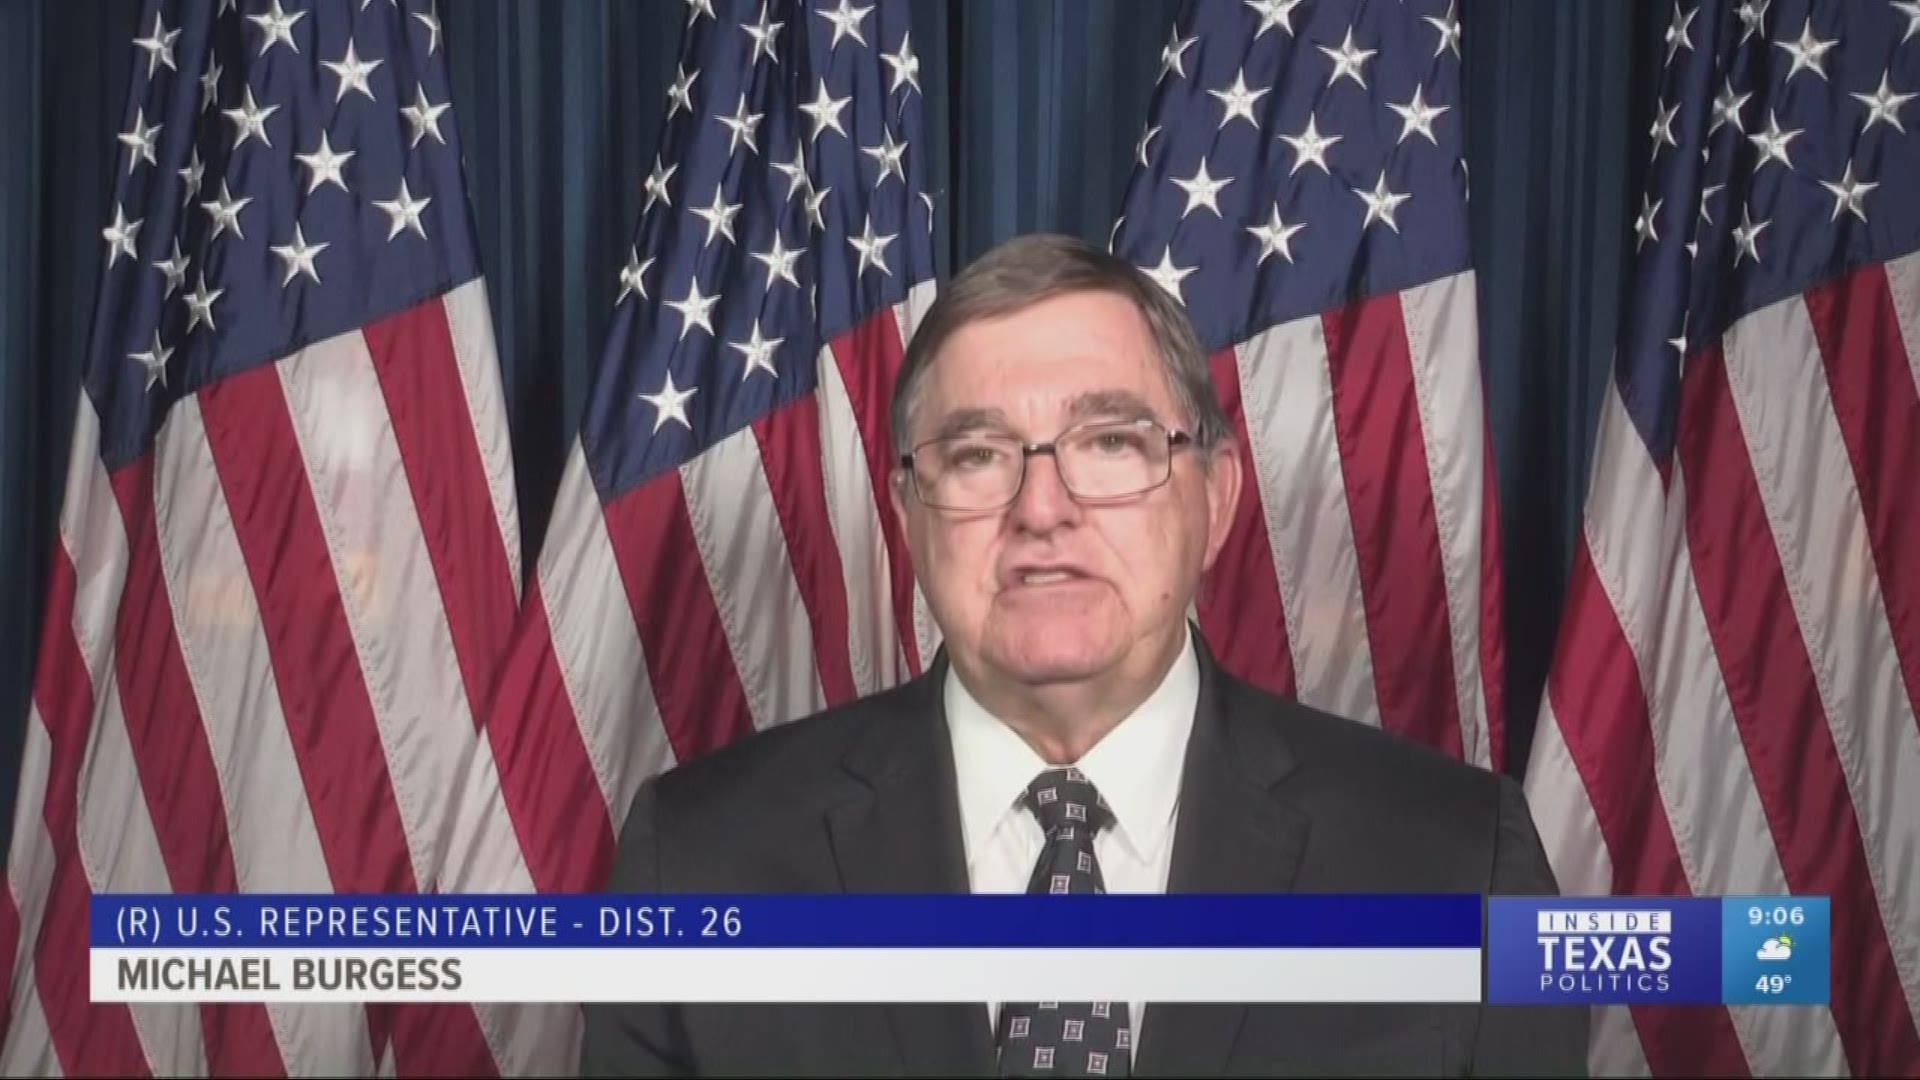 Congressman Michael Burgess (R-TX) says he’s been sounding the alarm in D.C. for weeks that lawmakers need to take the COVID-19 situation seriously.